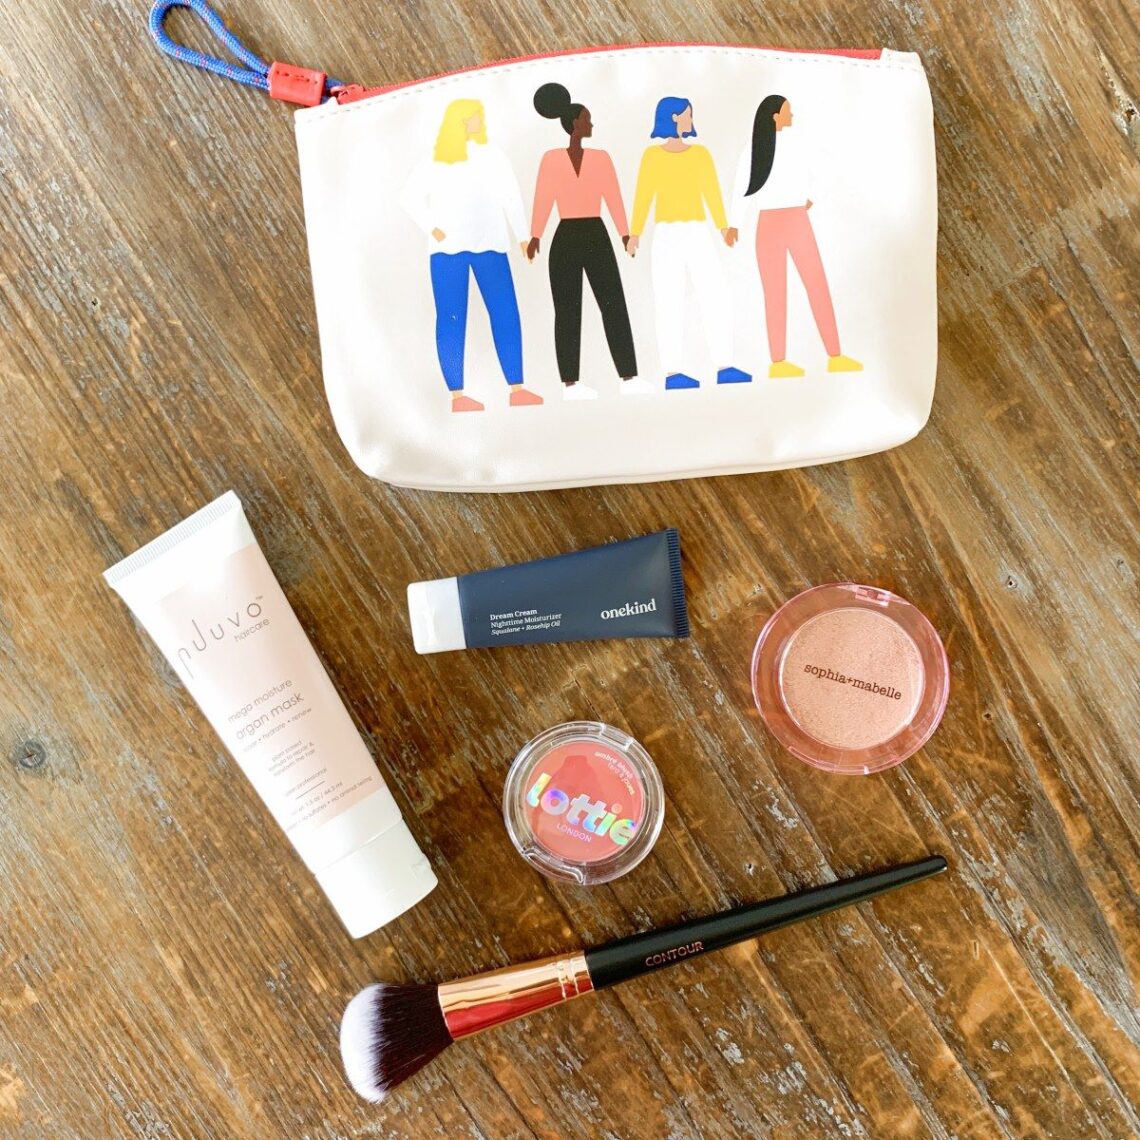 March ipsy bag review